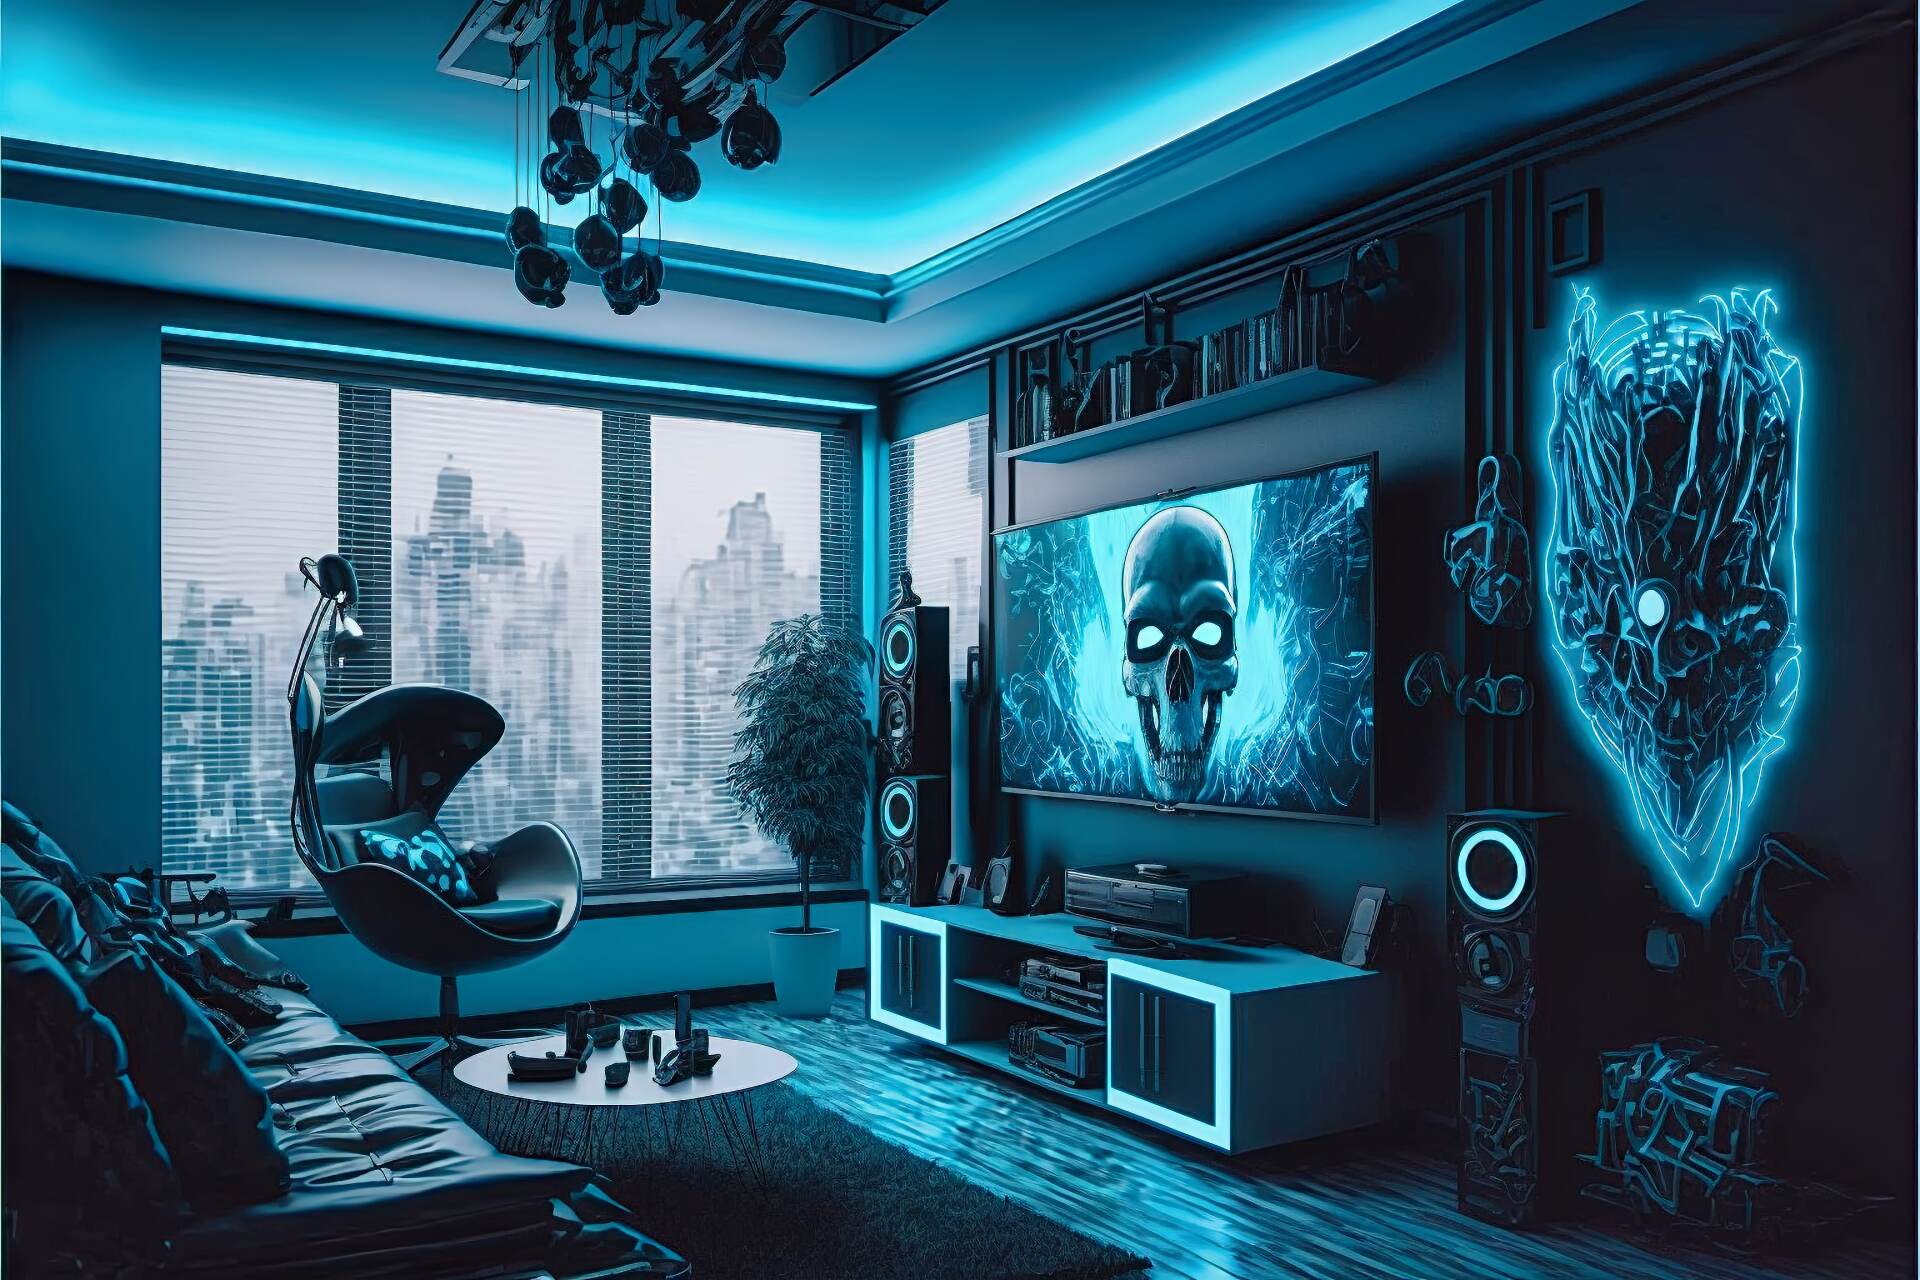 A Cyberpunk-Style Living Room With A Neon Nightscape Vibe. The Walls Are Painted Black And Adorned With Neon Lights In Various Shades Of Blue. The Furniture Is Made Up Of Sleek And Modern Pieces In A Monochromatic Color Scheme Of Black And White. A Large Flat Screen Tv Is Mounted On The Wall, Surrounded By More Neon Lights. A High-Tech Sound System And A Virtual Reality Gaming Console Complete The Look.